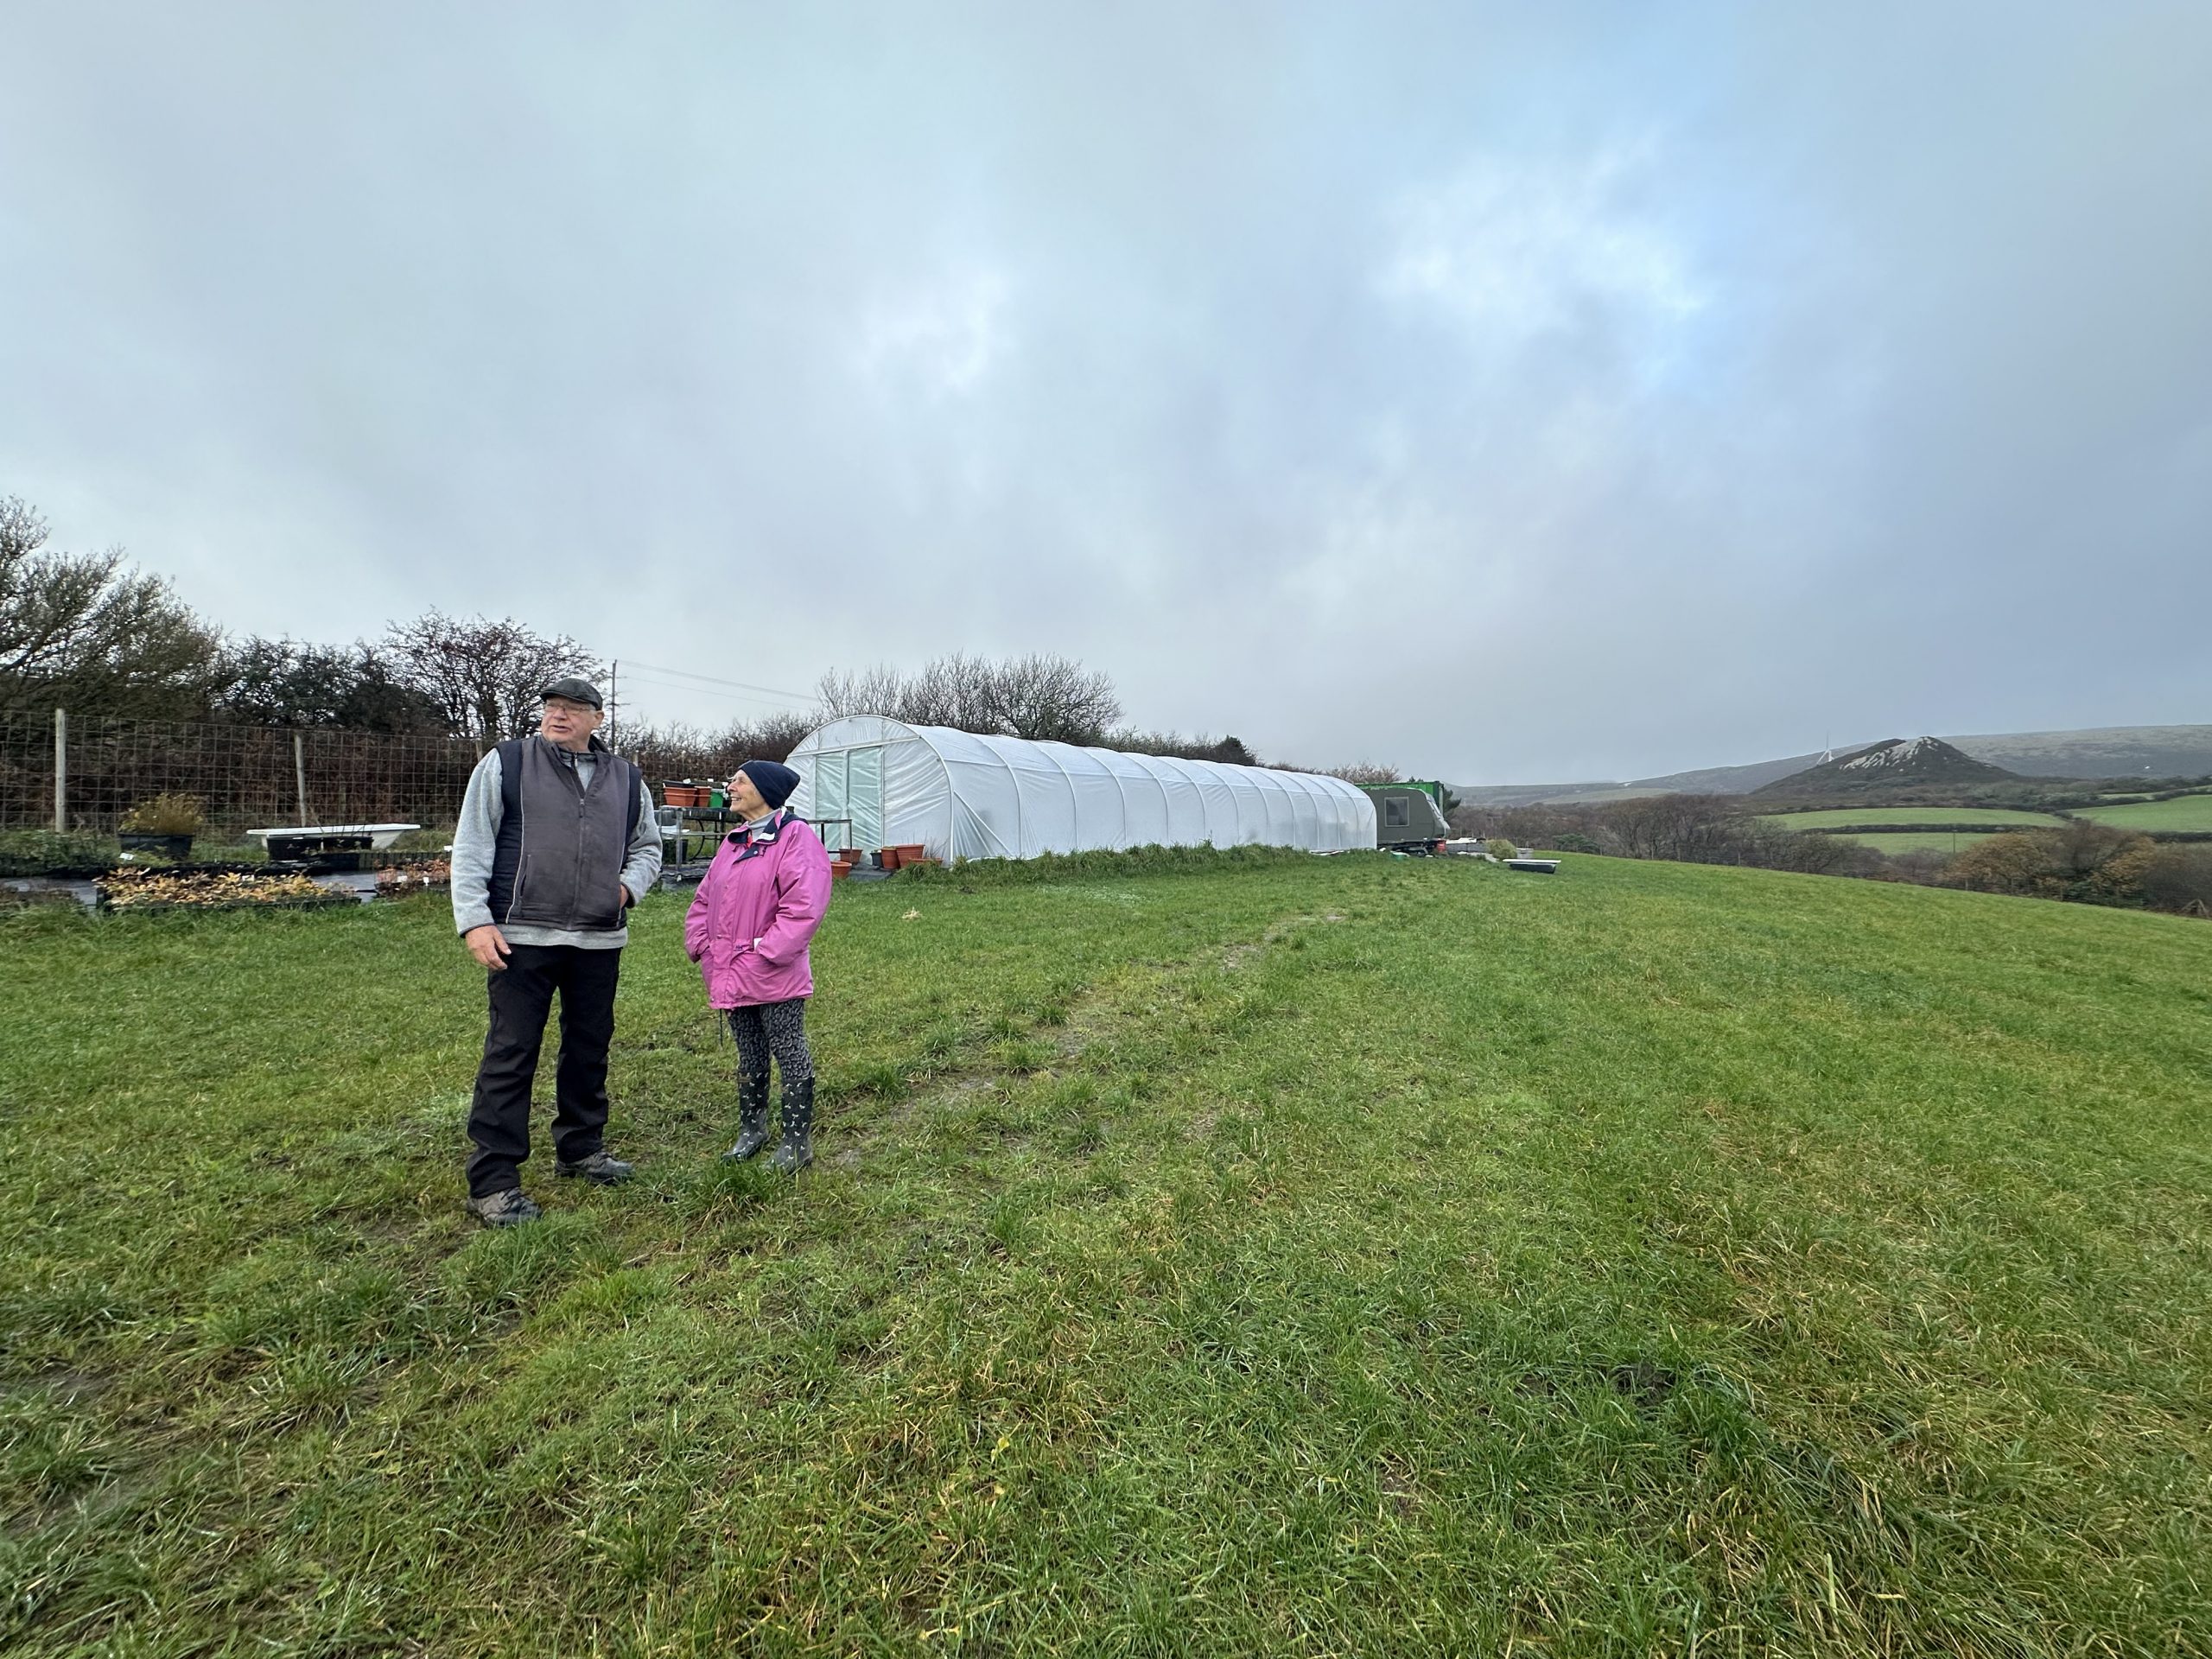 A ladty and gent in a stood in a community tree nursery with poly tunnel in the background